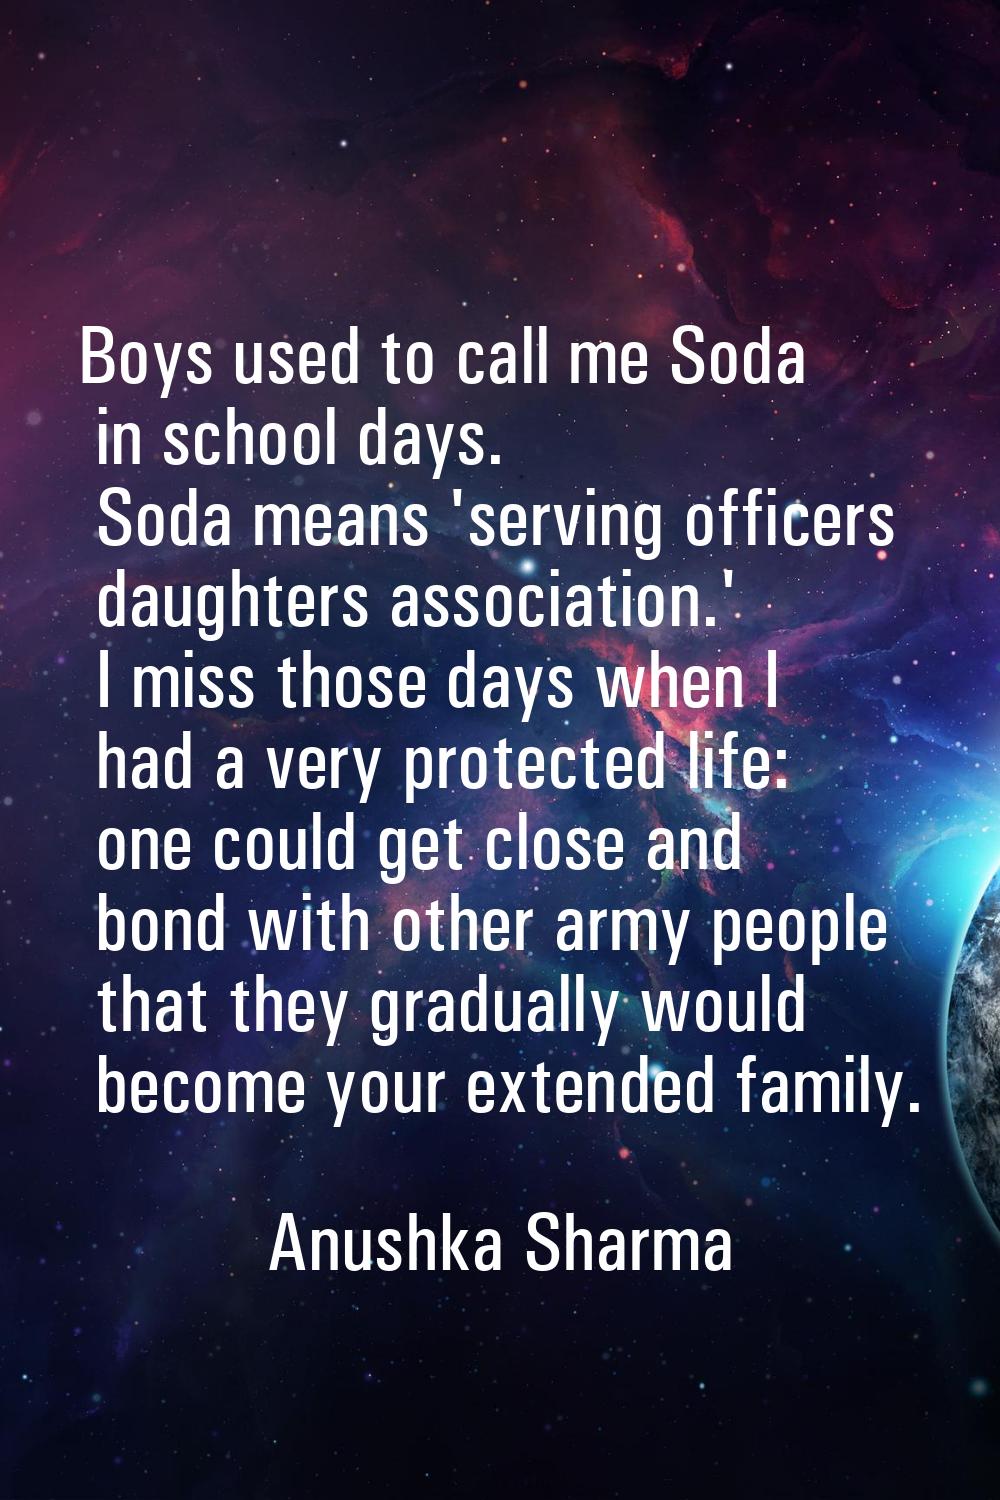 Boys used to call me Soda in school days. Soda means 'serving officers daughters association.' I mi